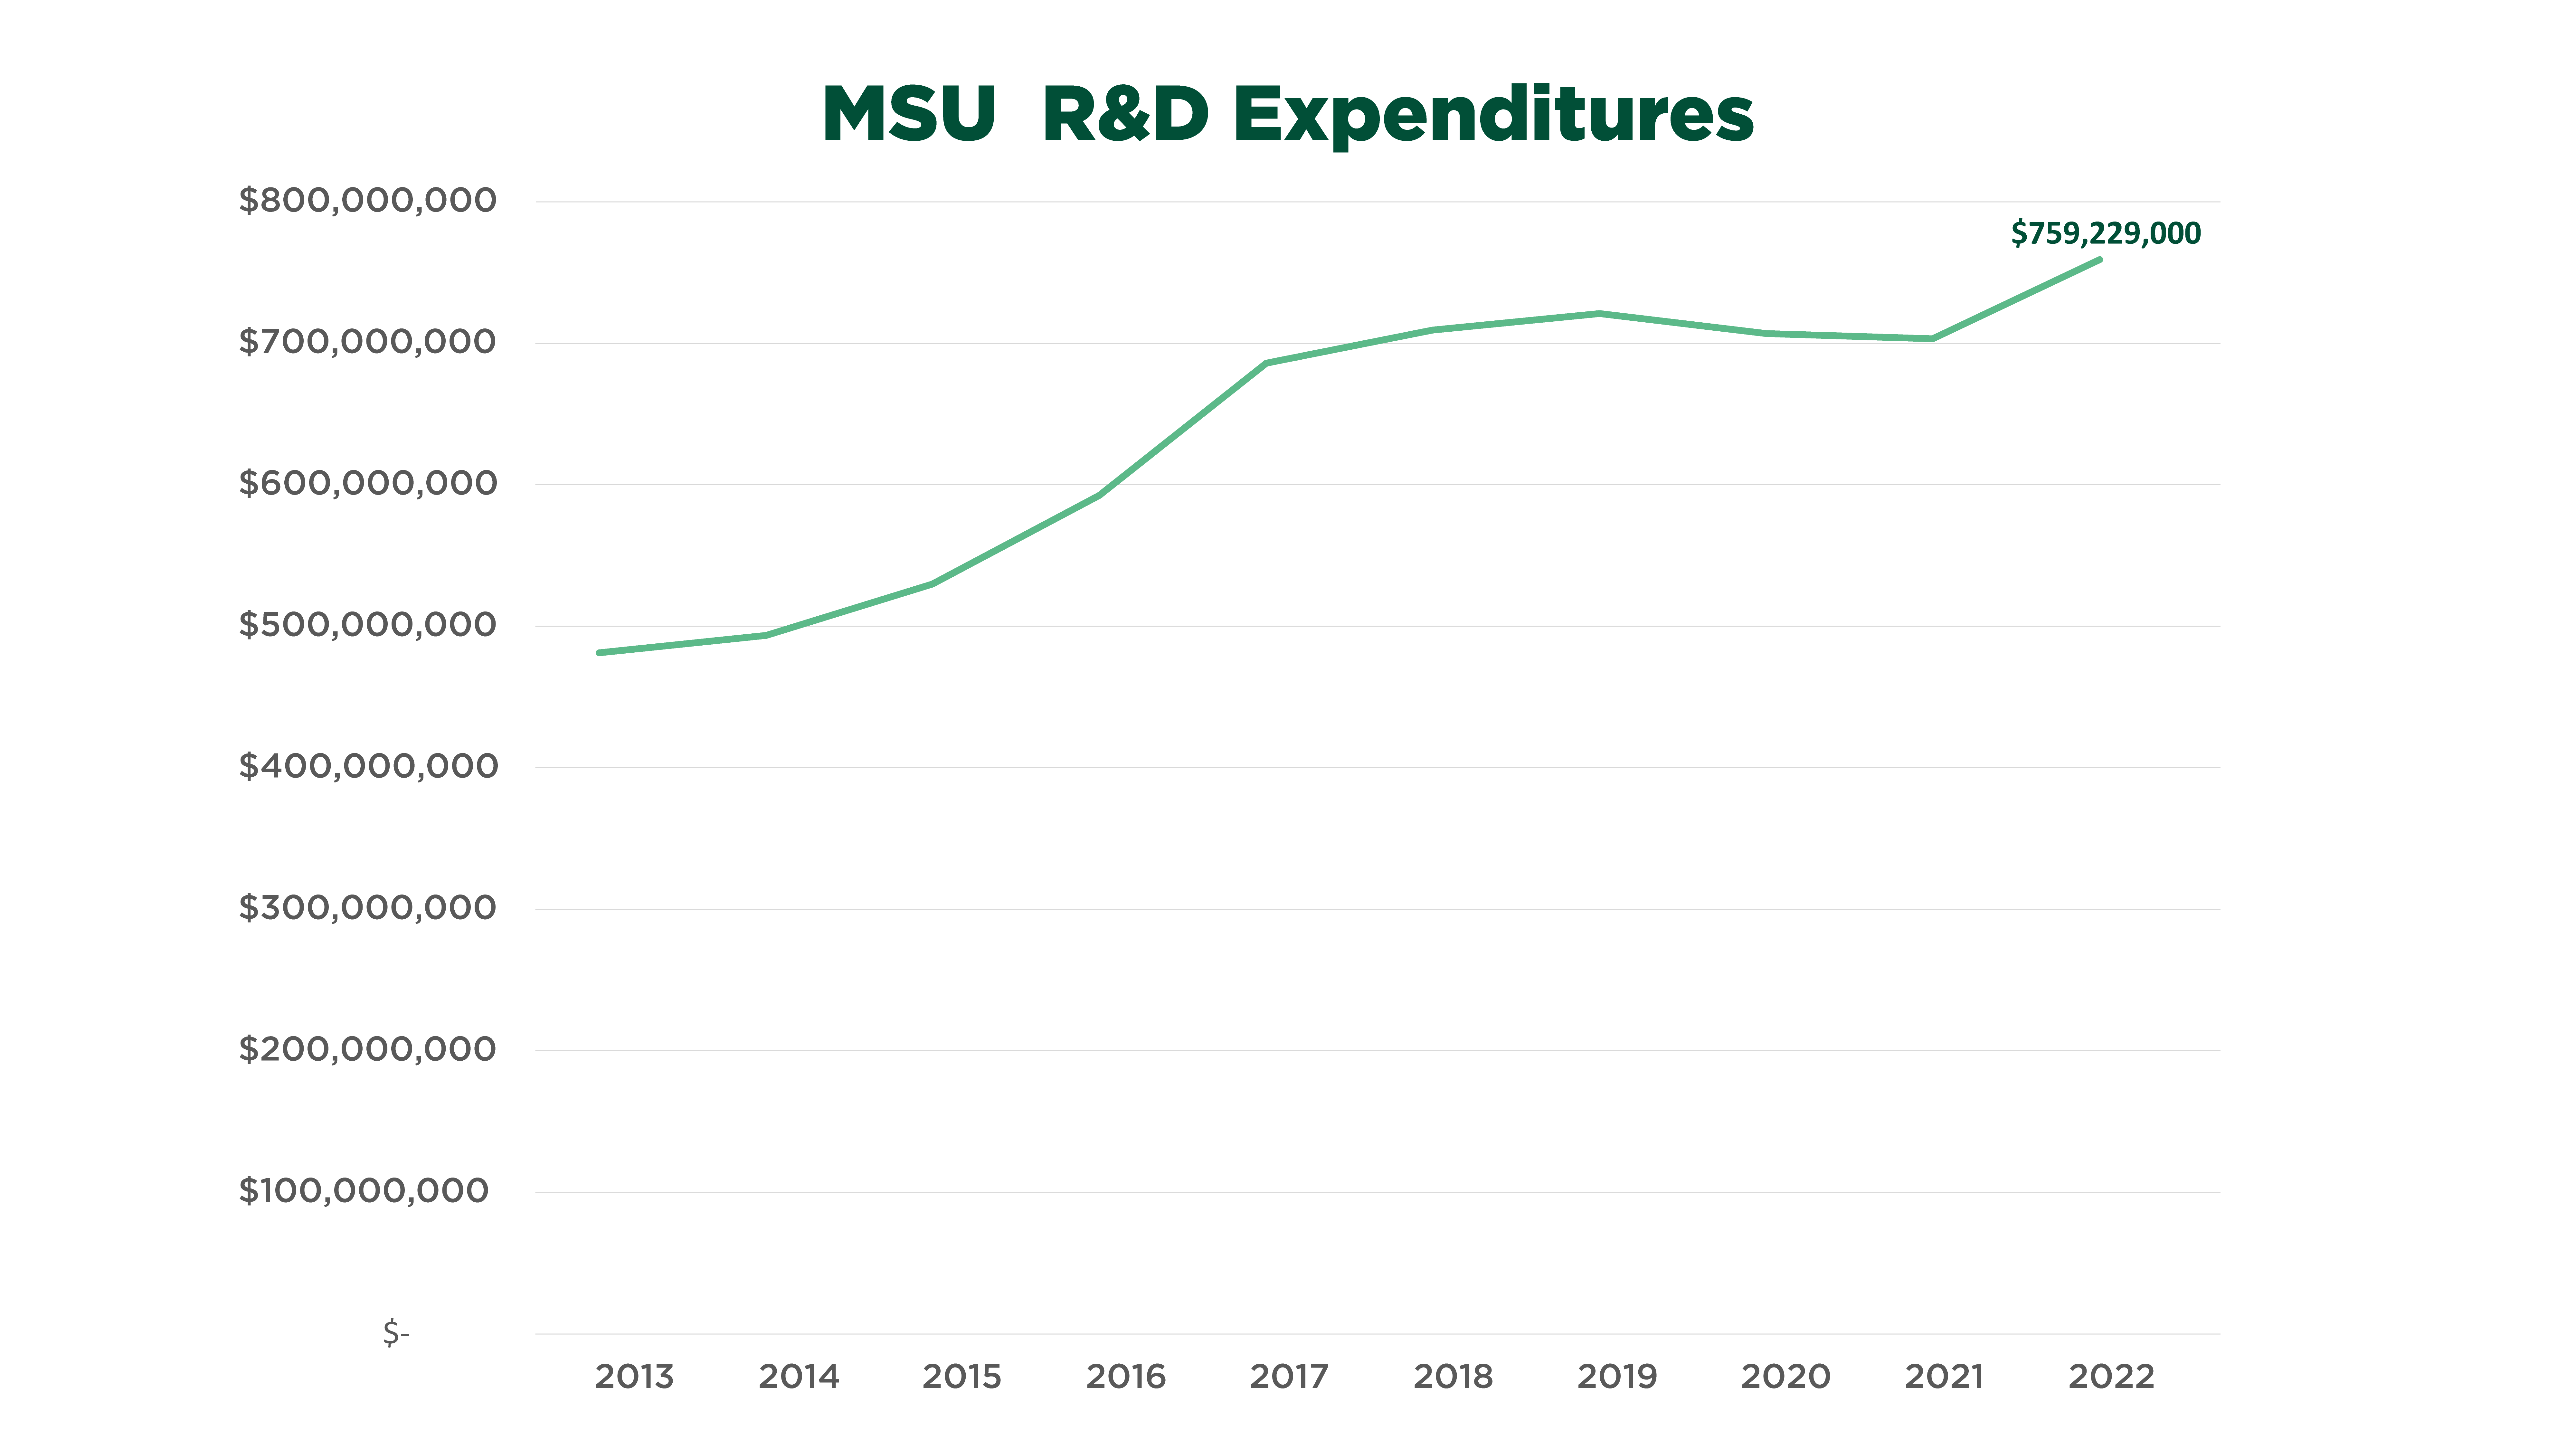 A graph showing HERD expenditures across 10 years